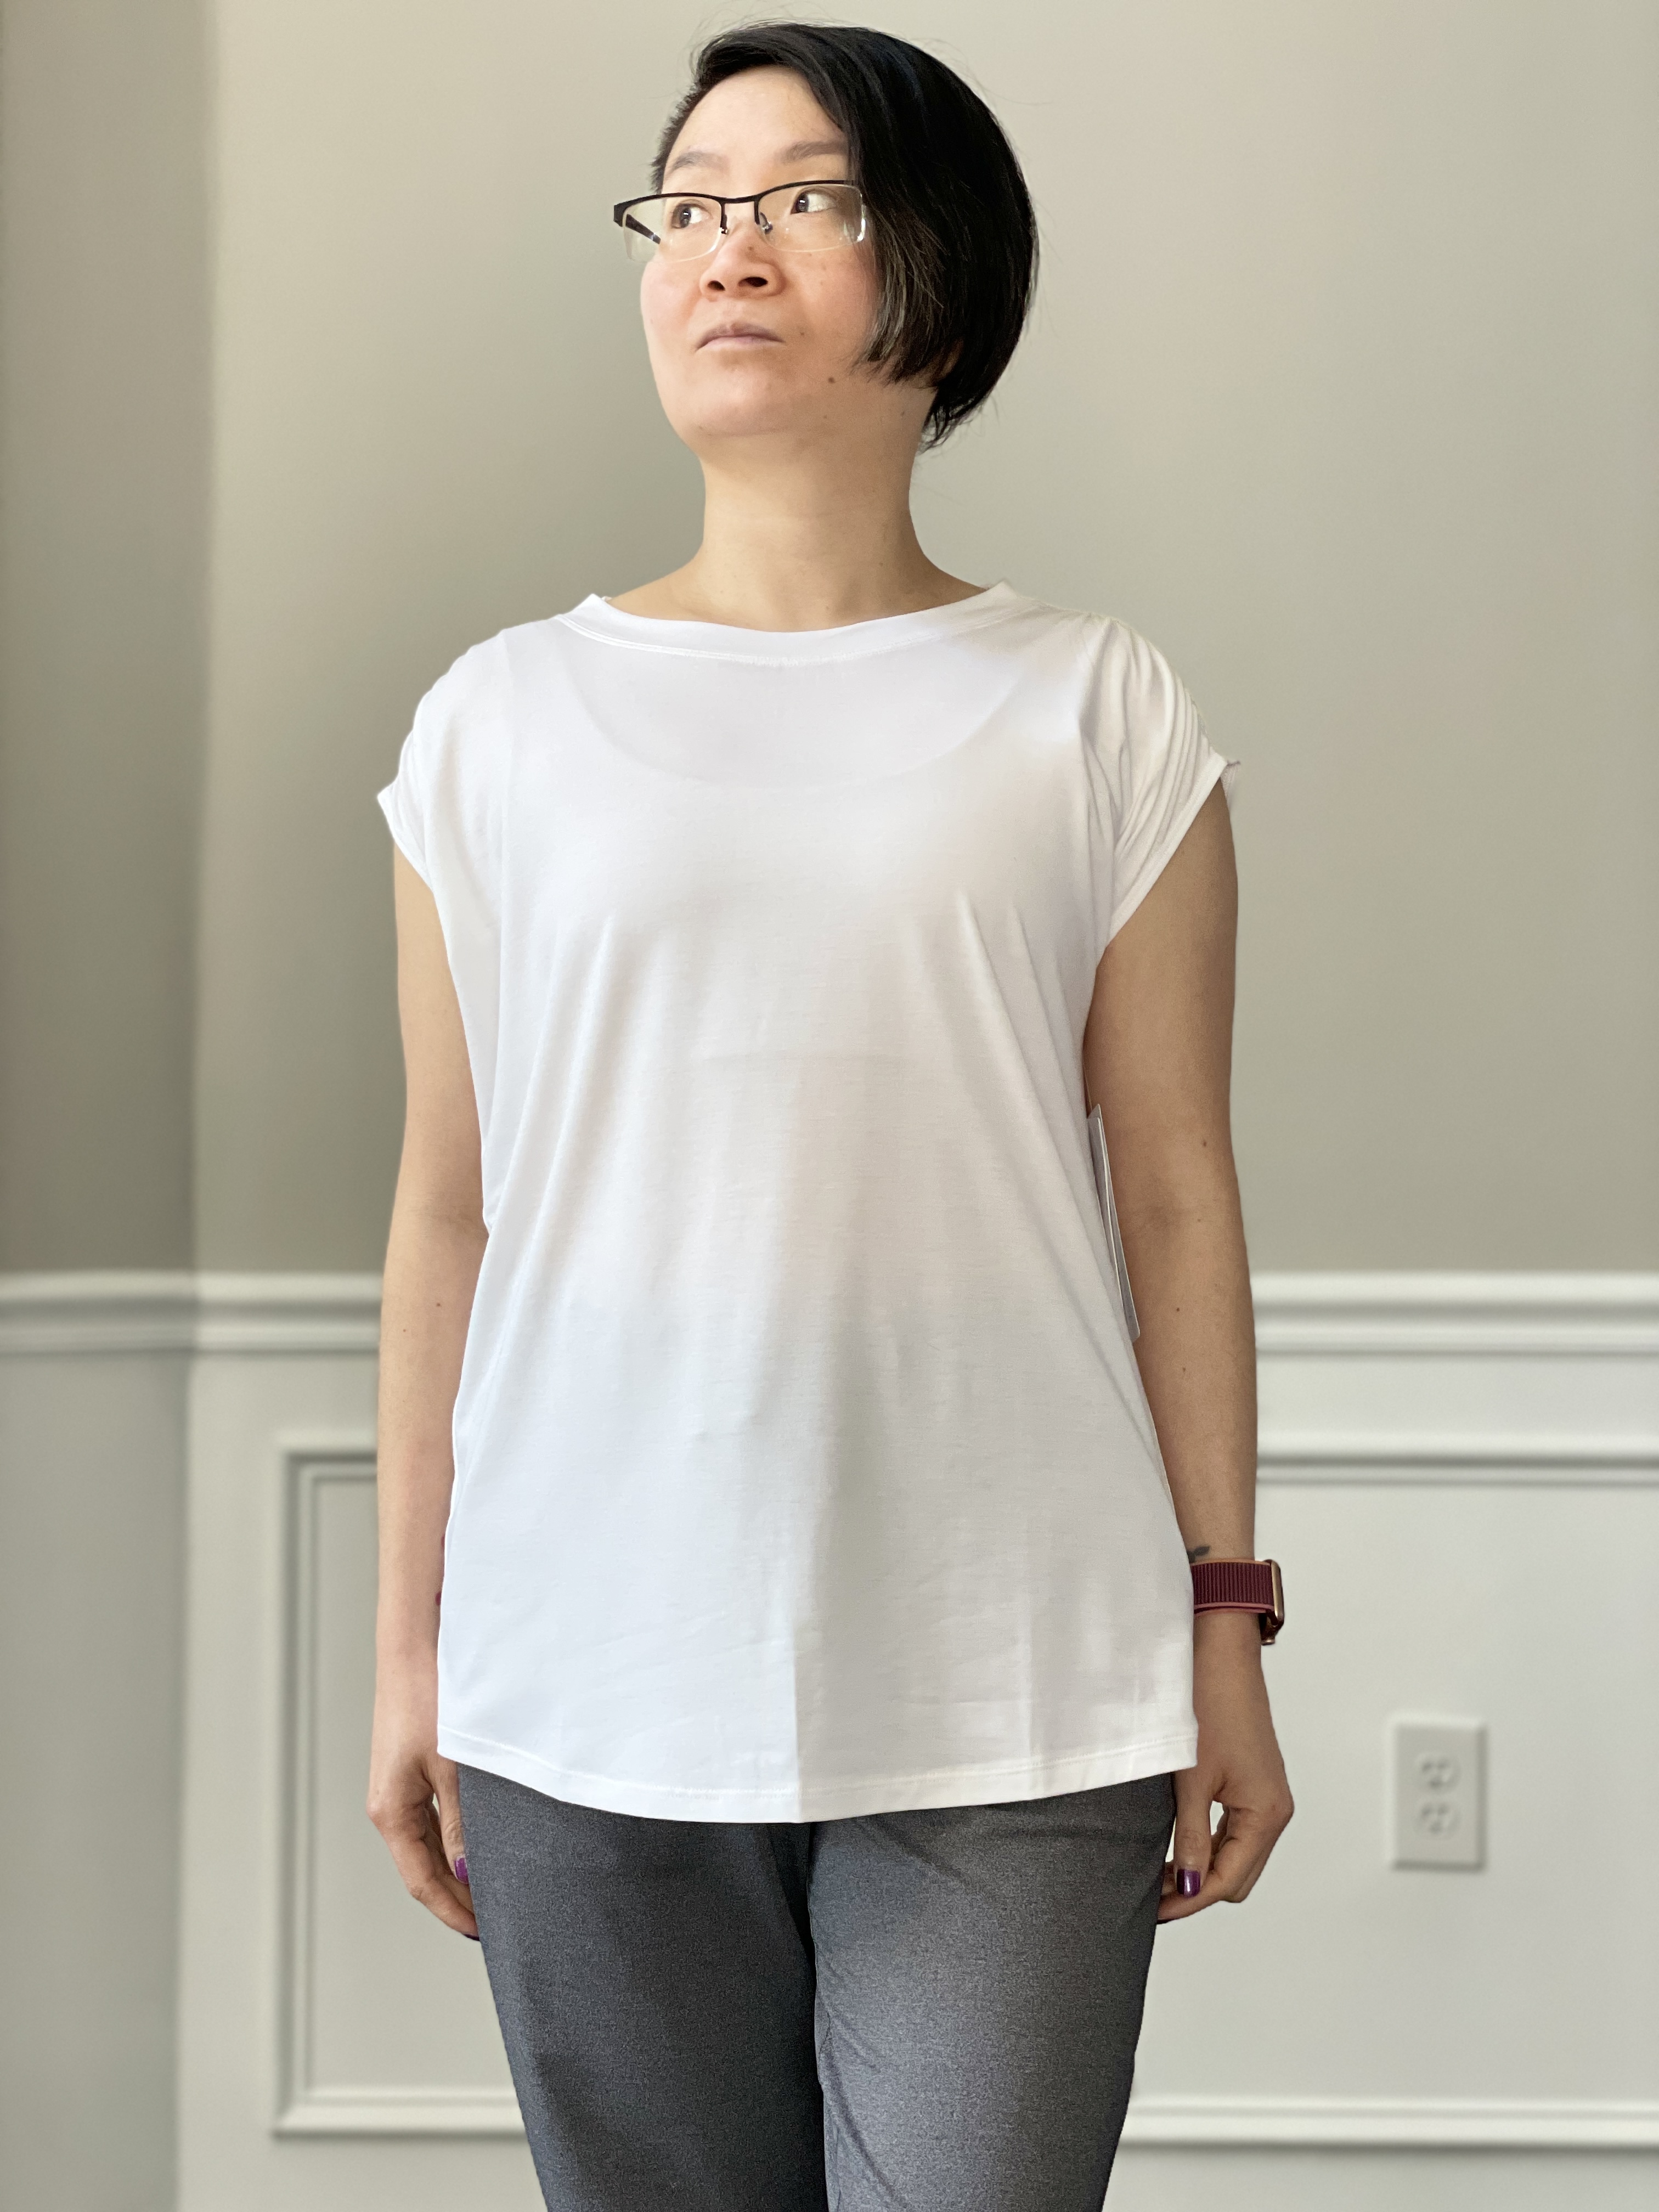 Sweaty Betty Tie Side Yoga Long Sleeve Top  Anthropologie Japan - Women's  Clothing, Accessories & Home